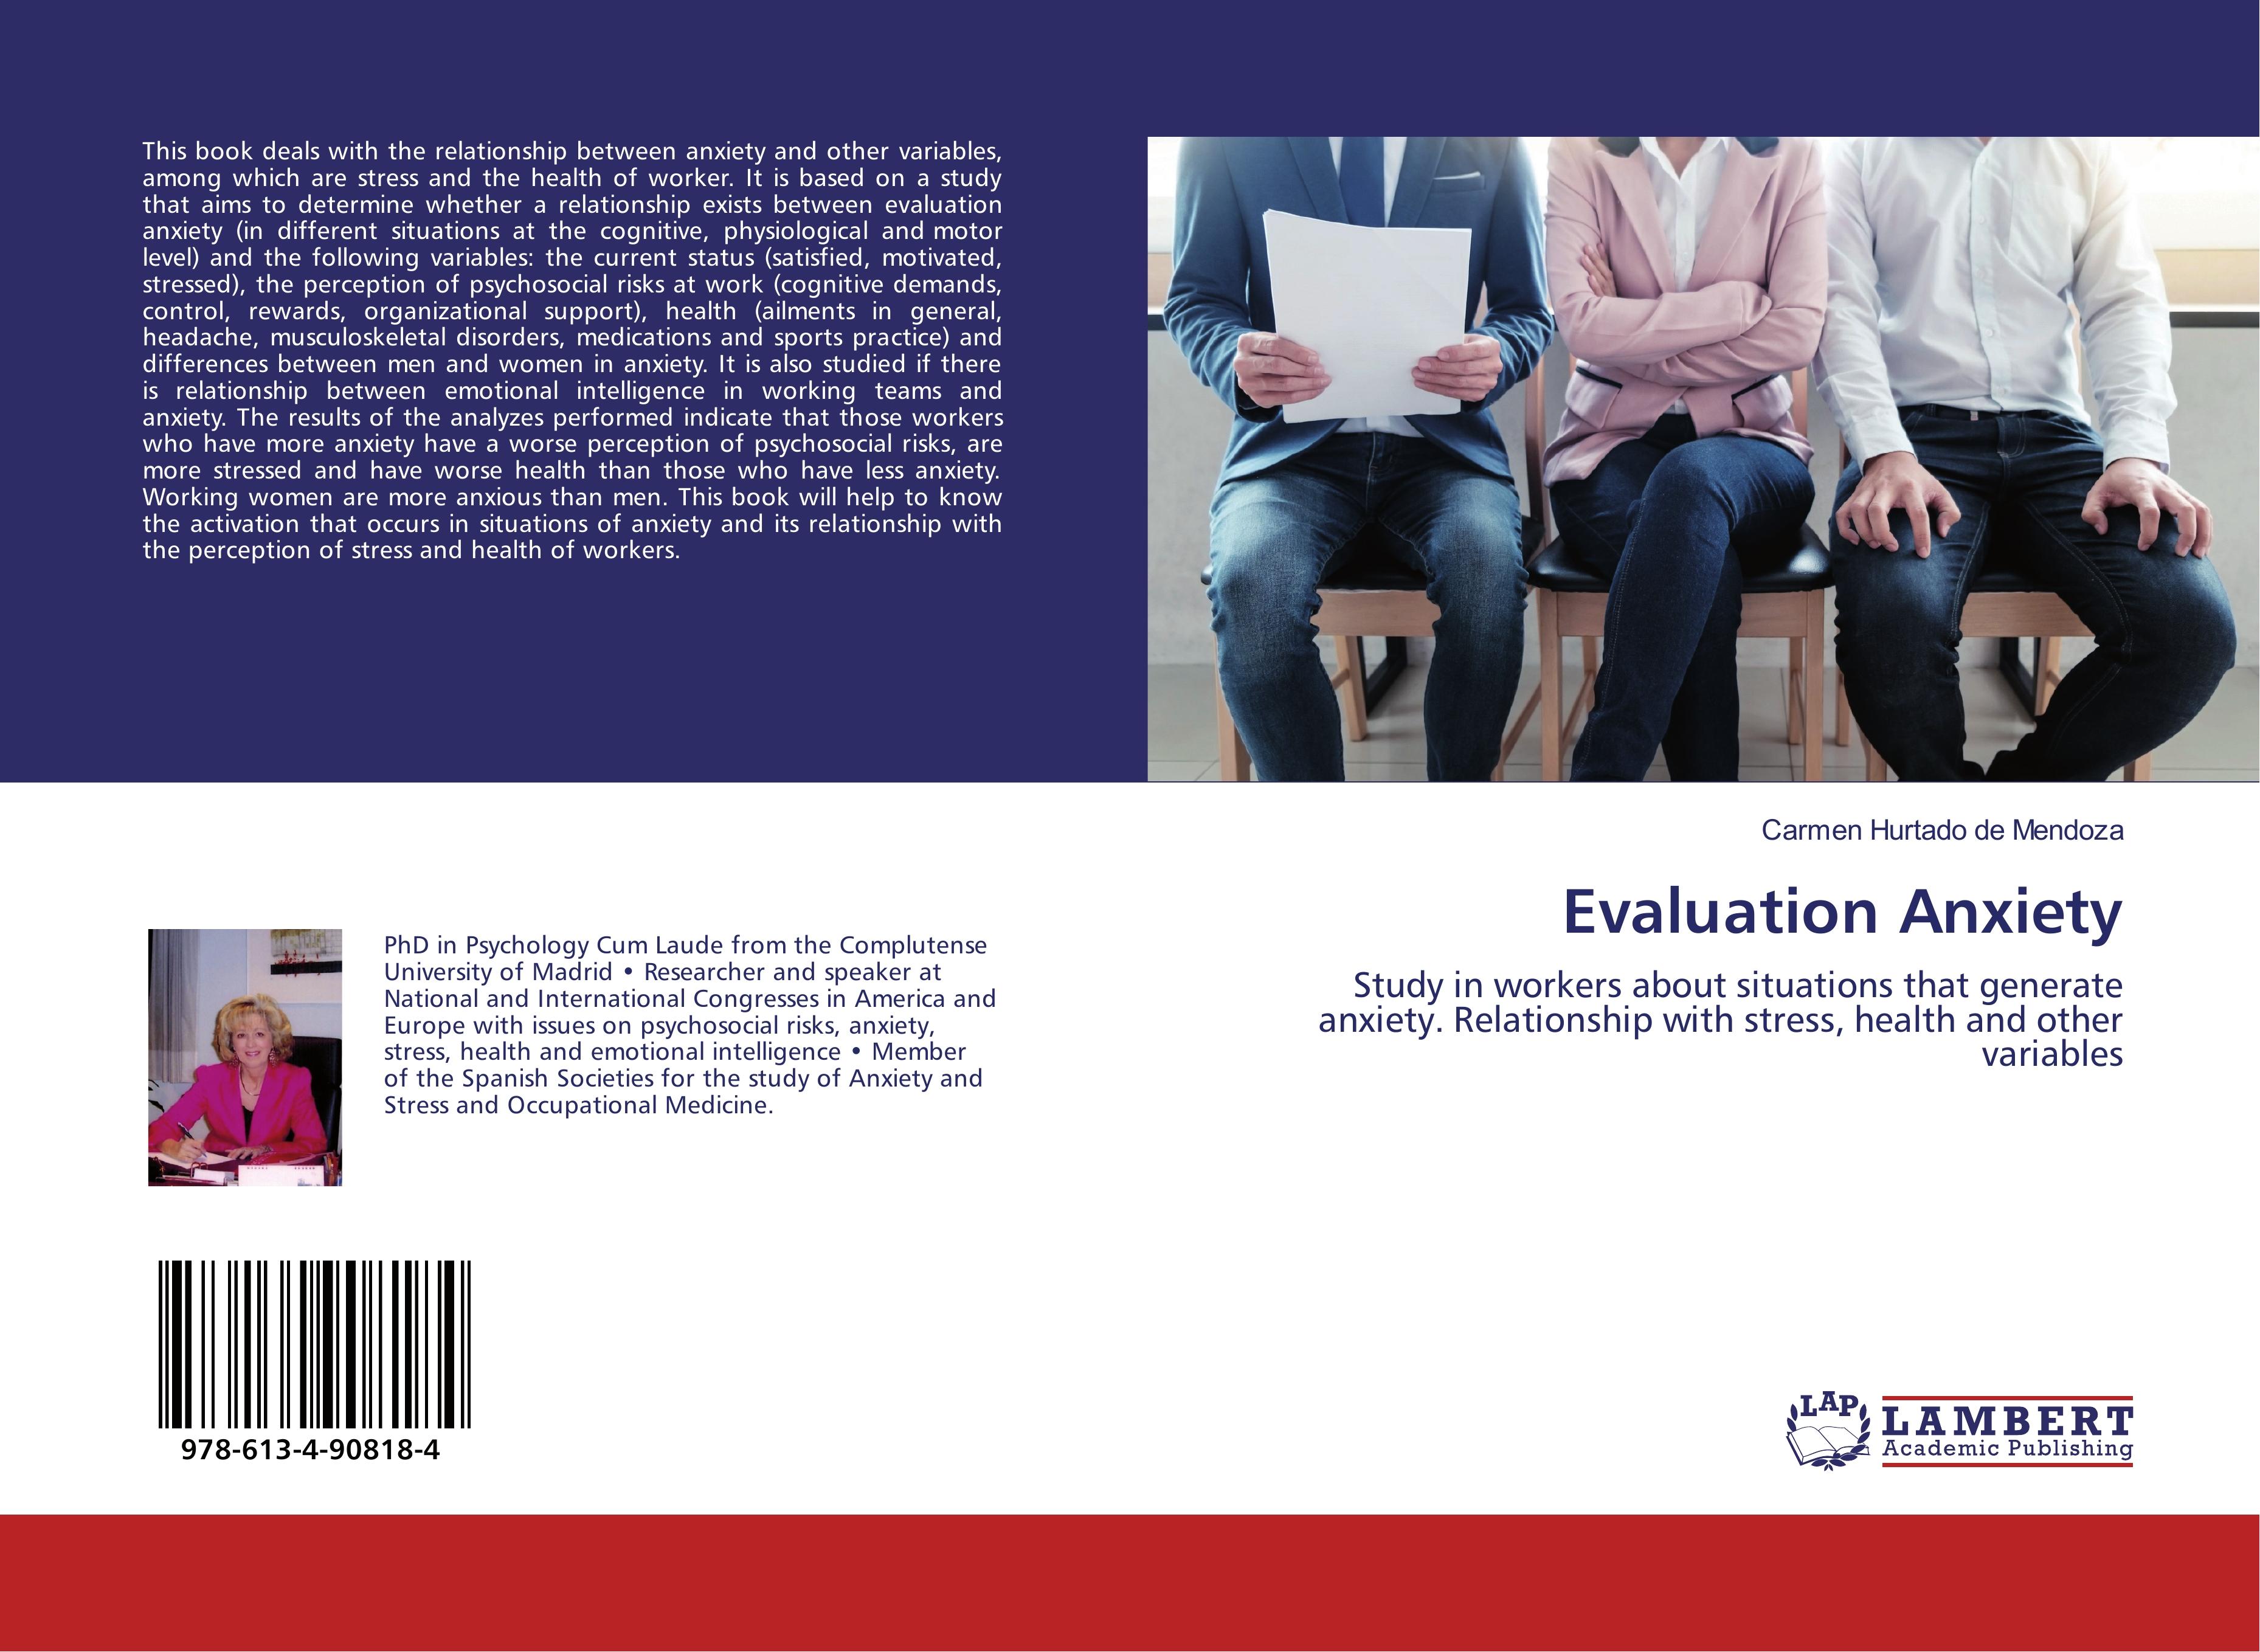 Evaluation Anxiety | Study in workers about situations that generate anxiety. Relationship with stress, health and other variables | Carmen Hurtado de Mendoza | Taschenbuch | Paperback | 80 S. | 2018 - Hurtado de Mendoza, Carmen